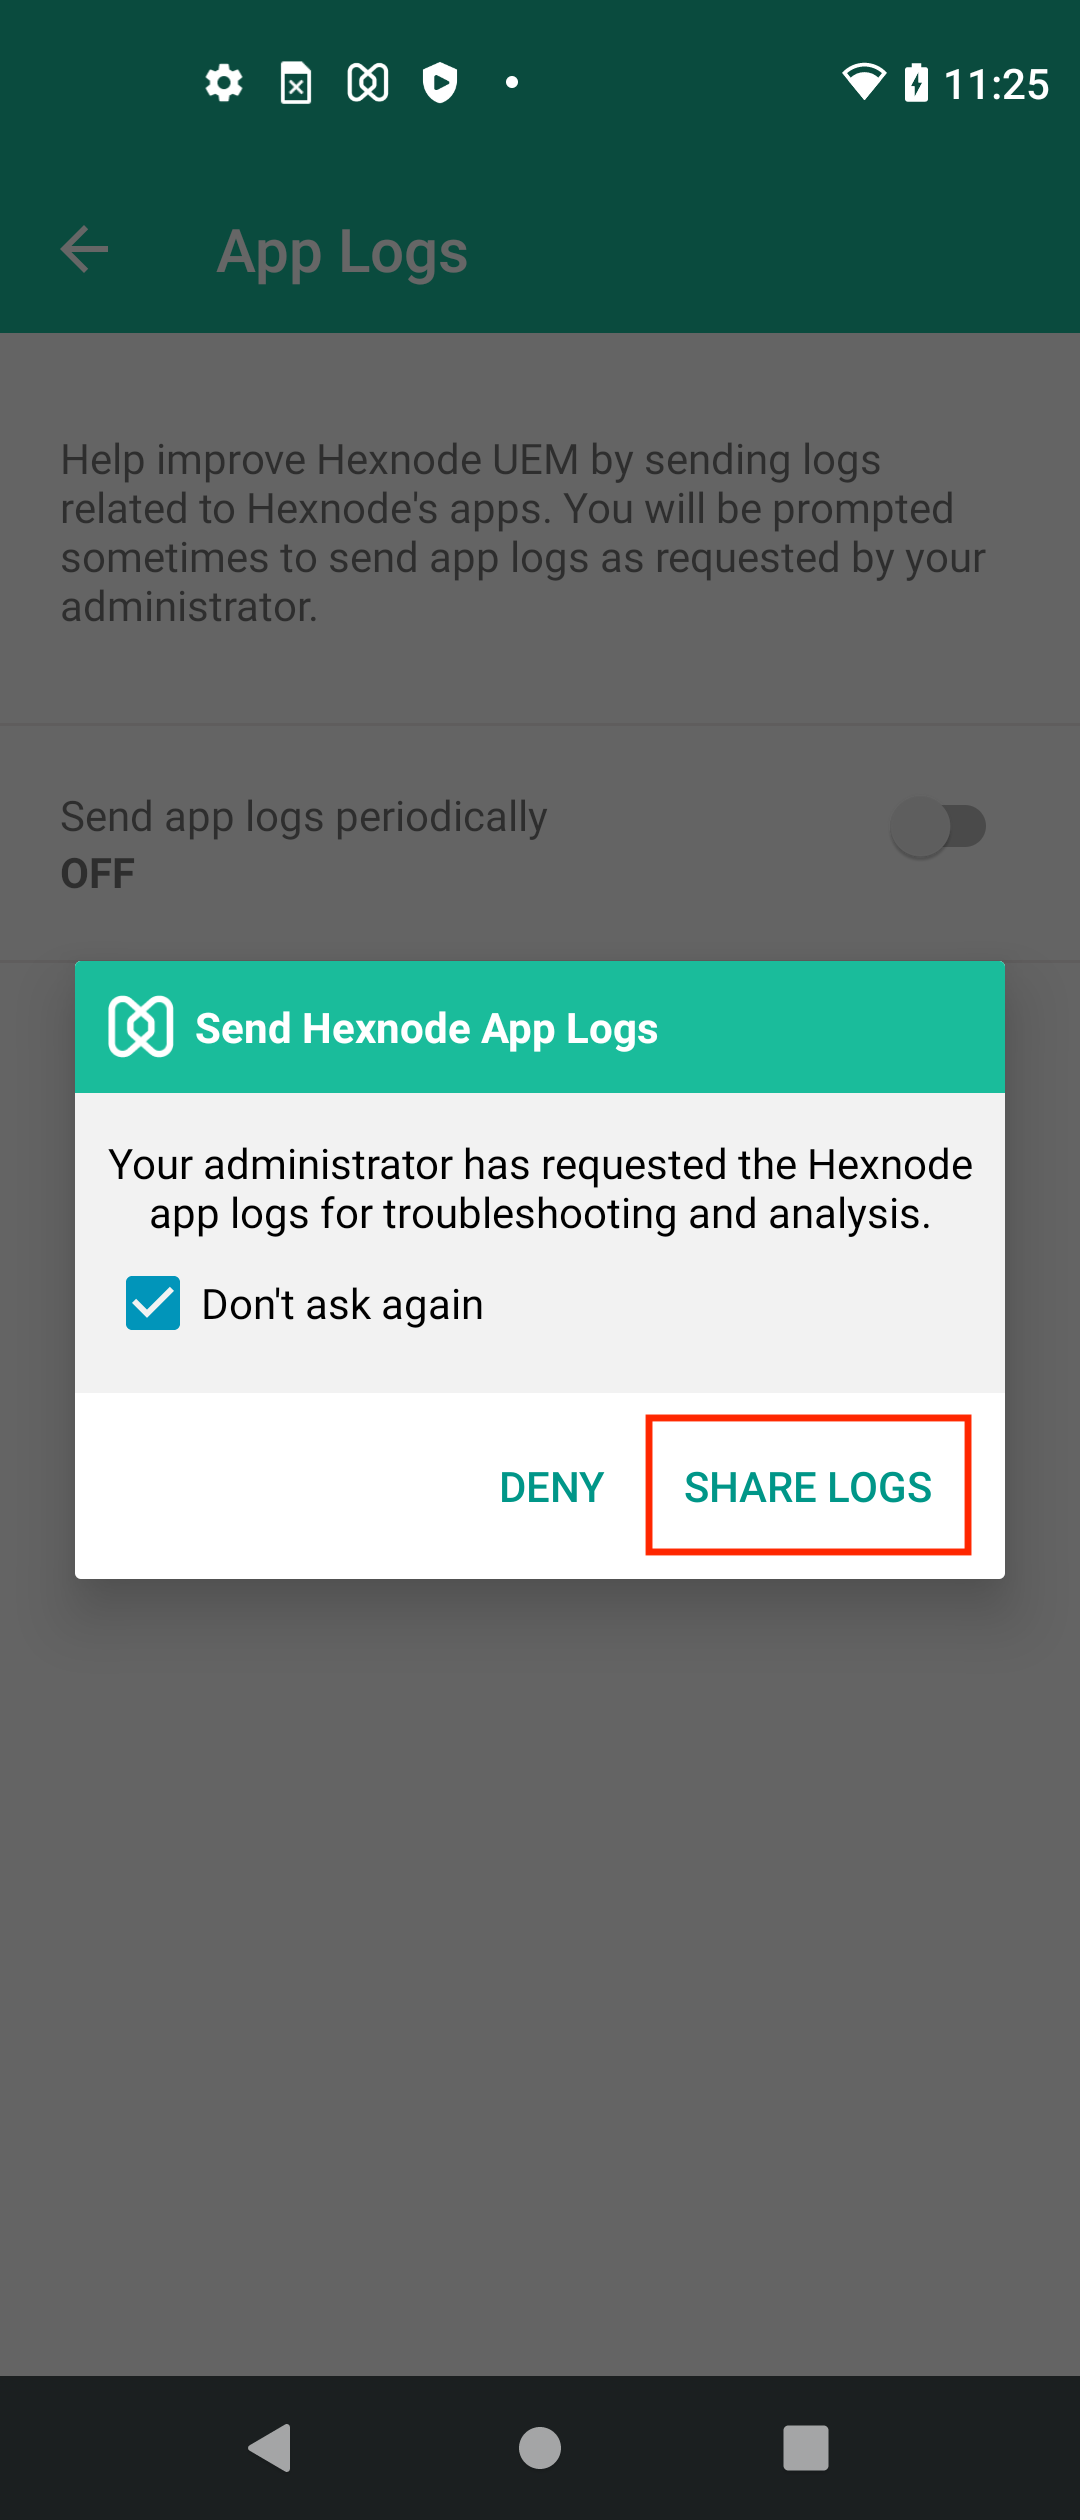 share logs from the devices